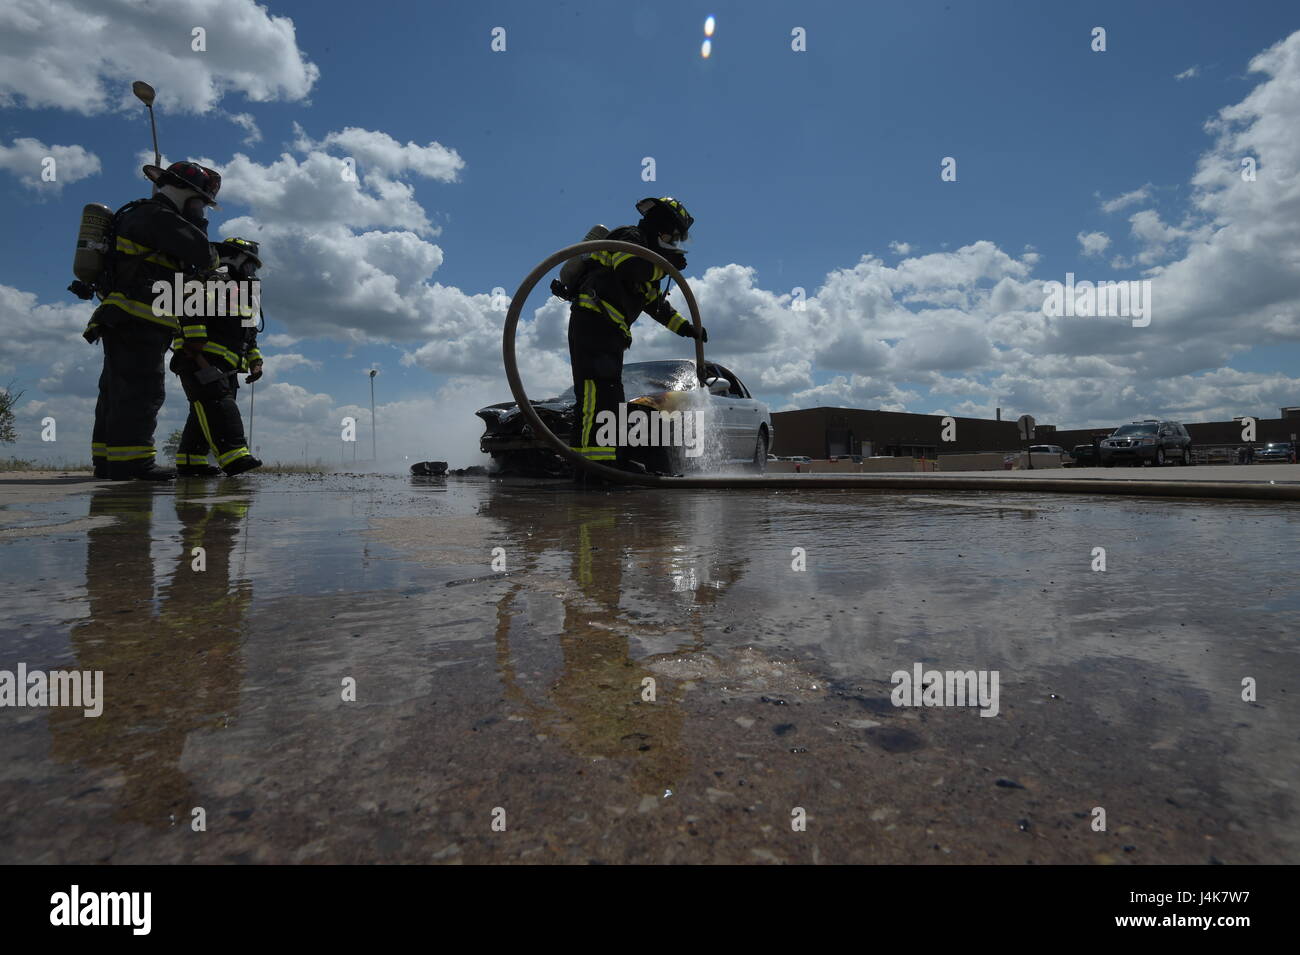 Members of the Tinker Fire and Emergency Services, 72nd Civil Engineer Squadron, work together to extinguish a vehicle fire May 4, 2017, Tinker Air Force Base, Oklahoma. William Green hoses the wheel-well of the car down while Capt. David Jones, left, and Aaron Simpson, background, stands-by as spotters. The privately-owned vehicle developed mechanical trouble and caught fire near the Oklahoma City Air Logistics Complexs' building 9001. (U.S. Air Force photo/Greg L. Davis) Stock Photo